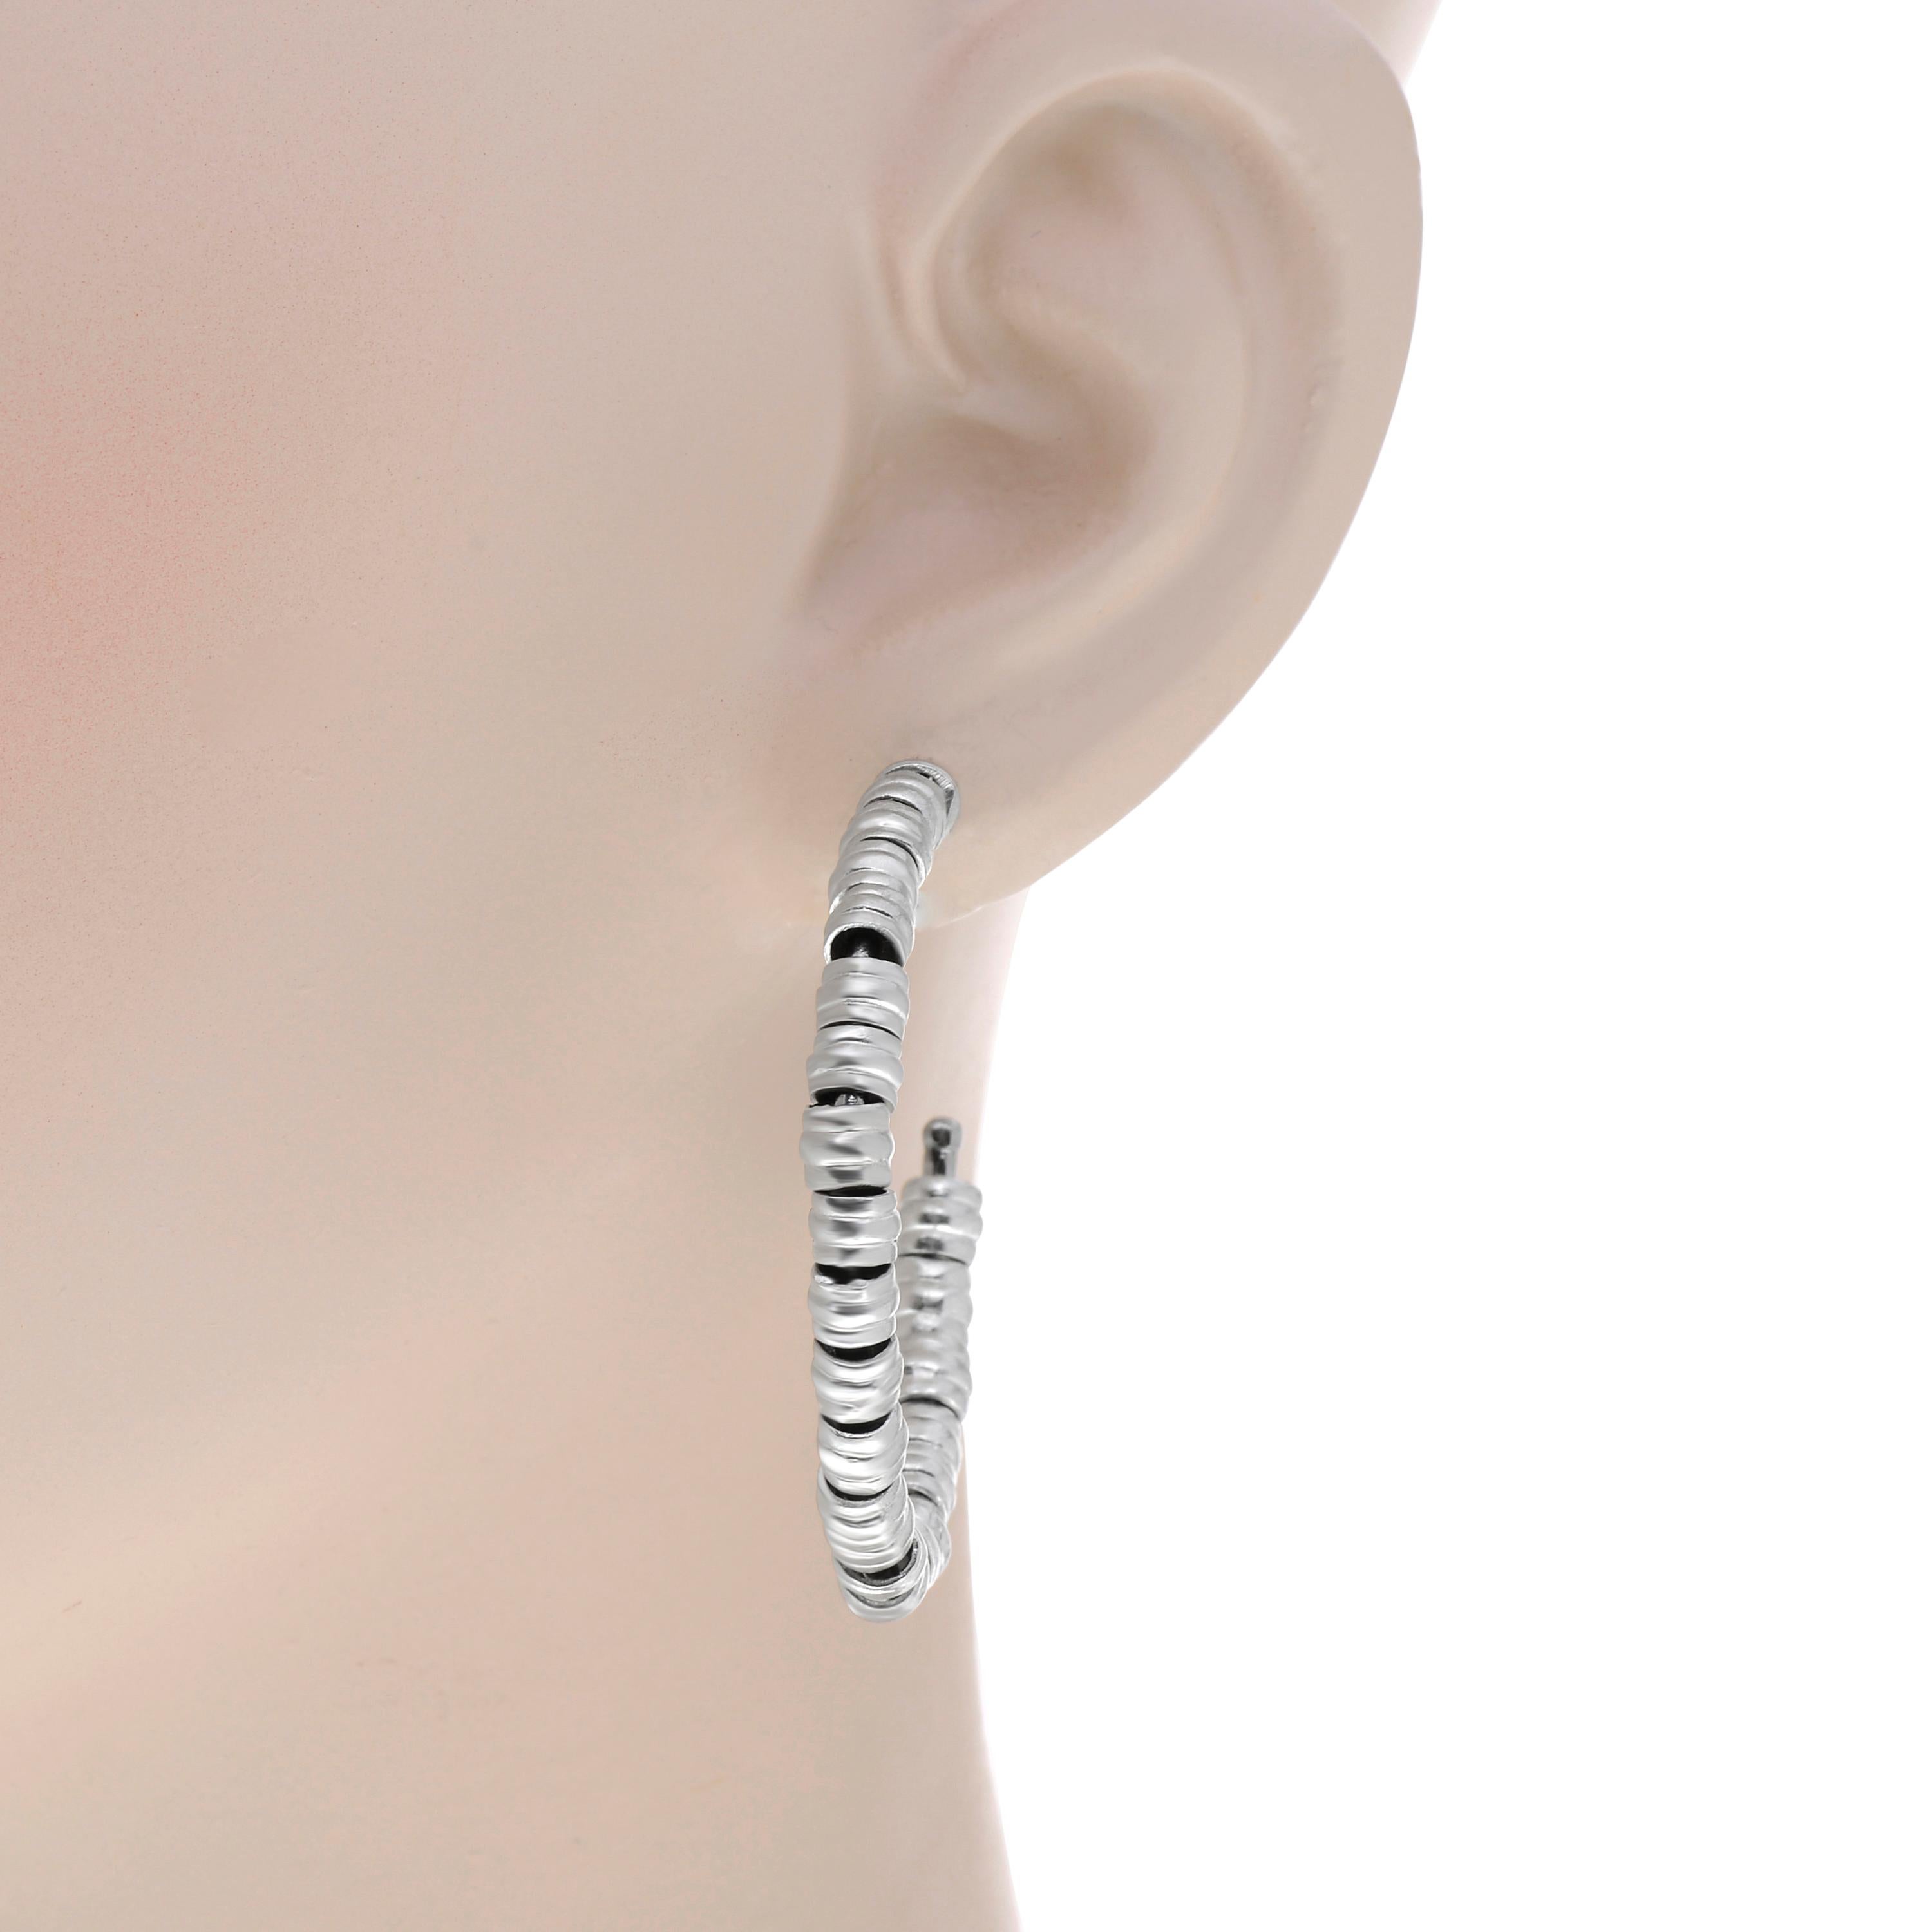 Armenta New World 14K white gold and sterling silver hoop earrings feature sterling silver and 18K white gold hoops set with 50 organic pebble beads. The total size is 1 3/4